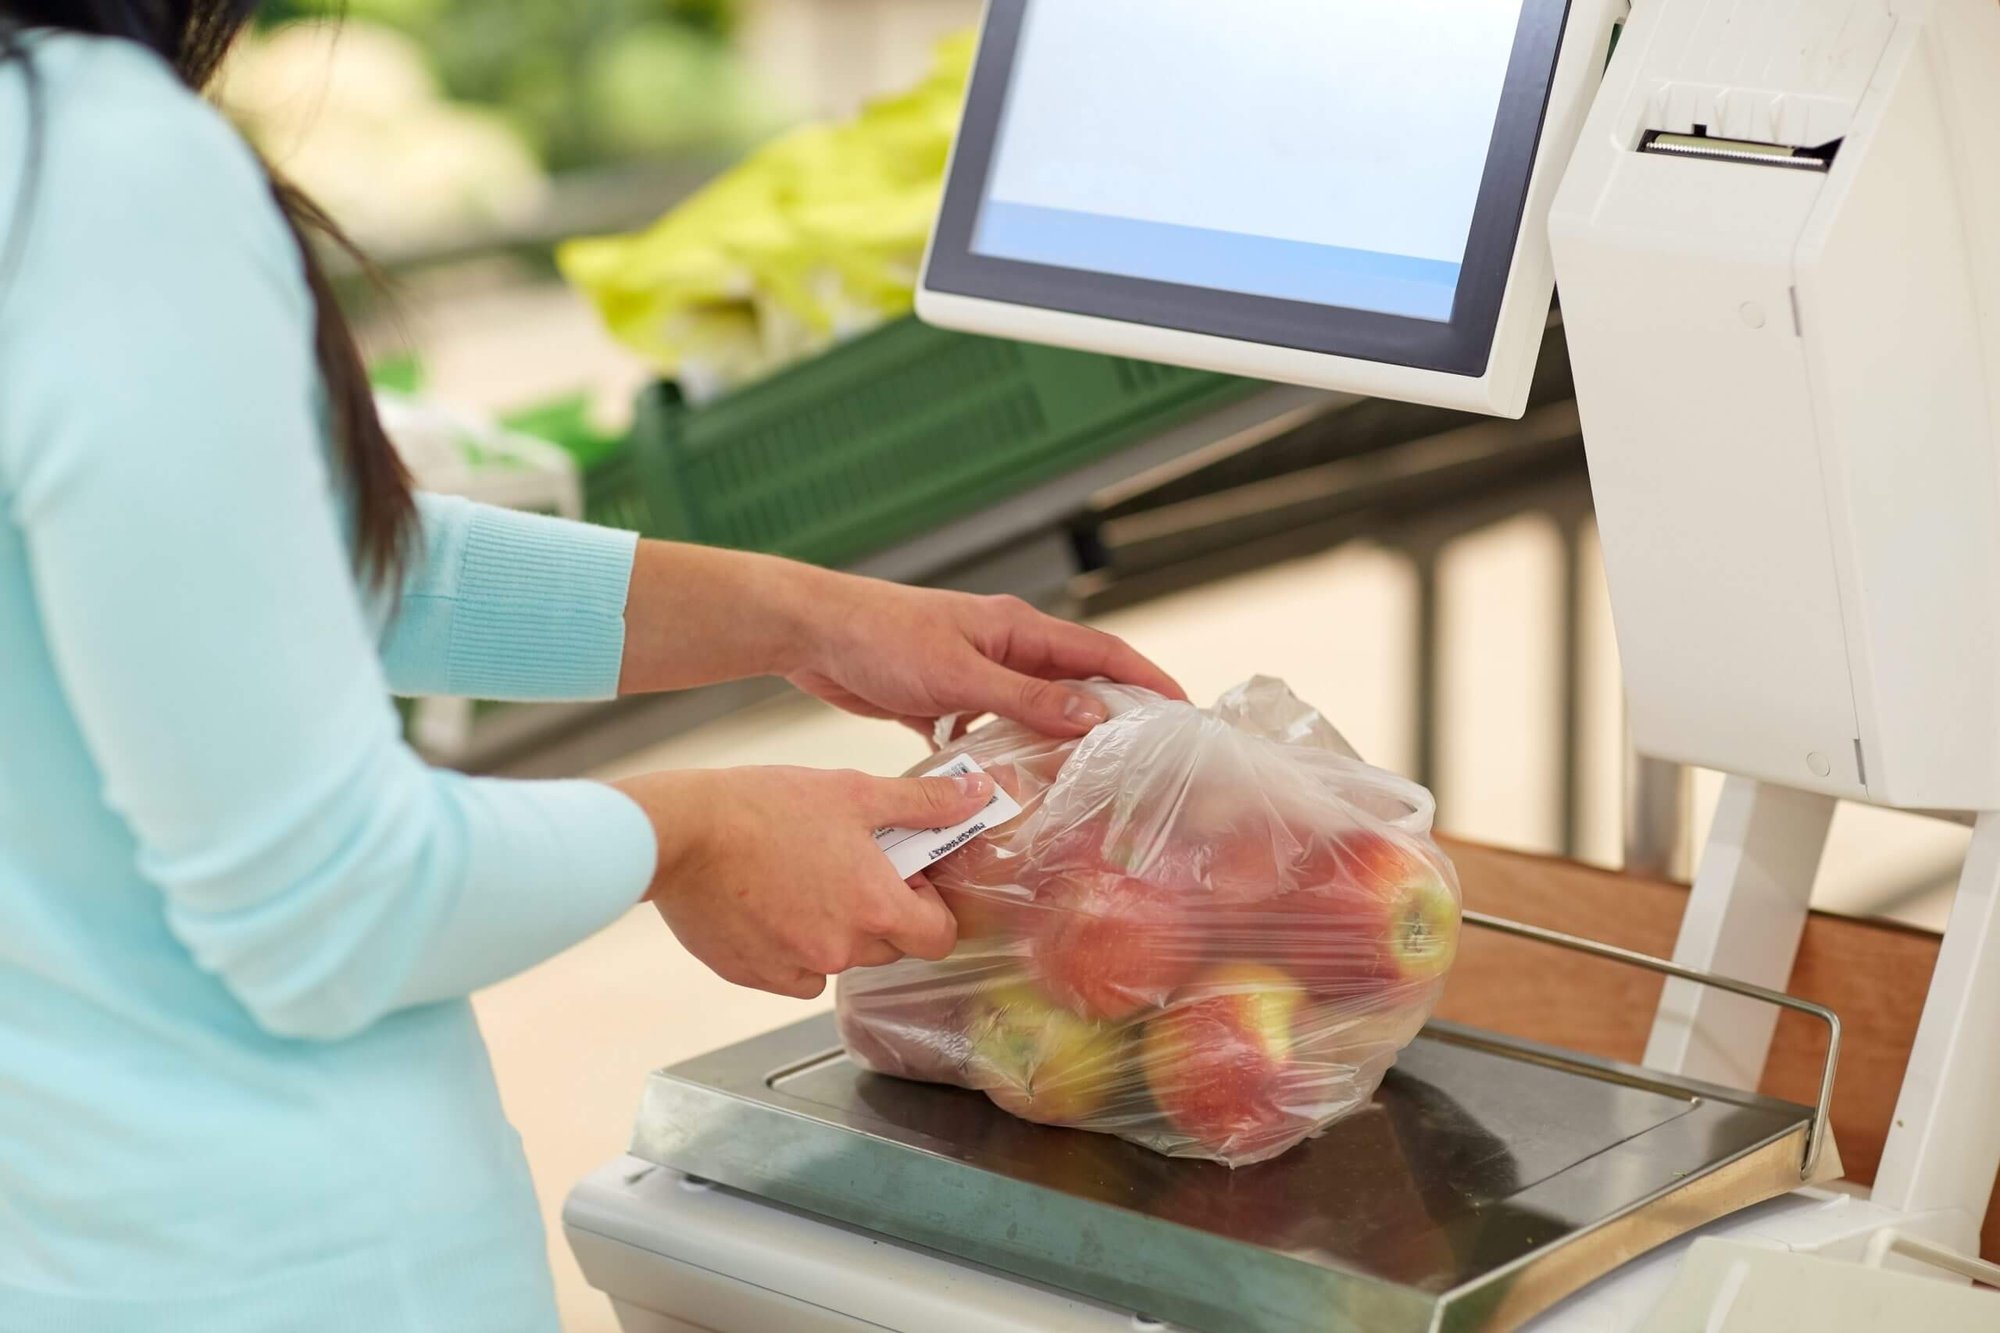 Person scans a bag of apples at a grocery checkout kiosk